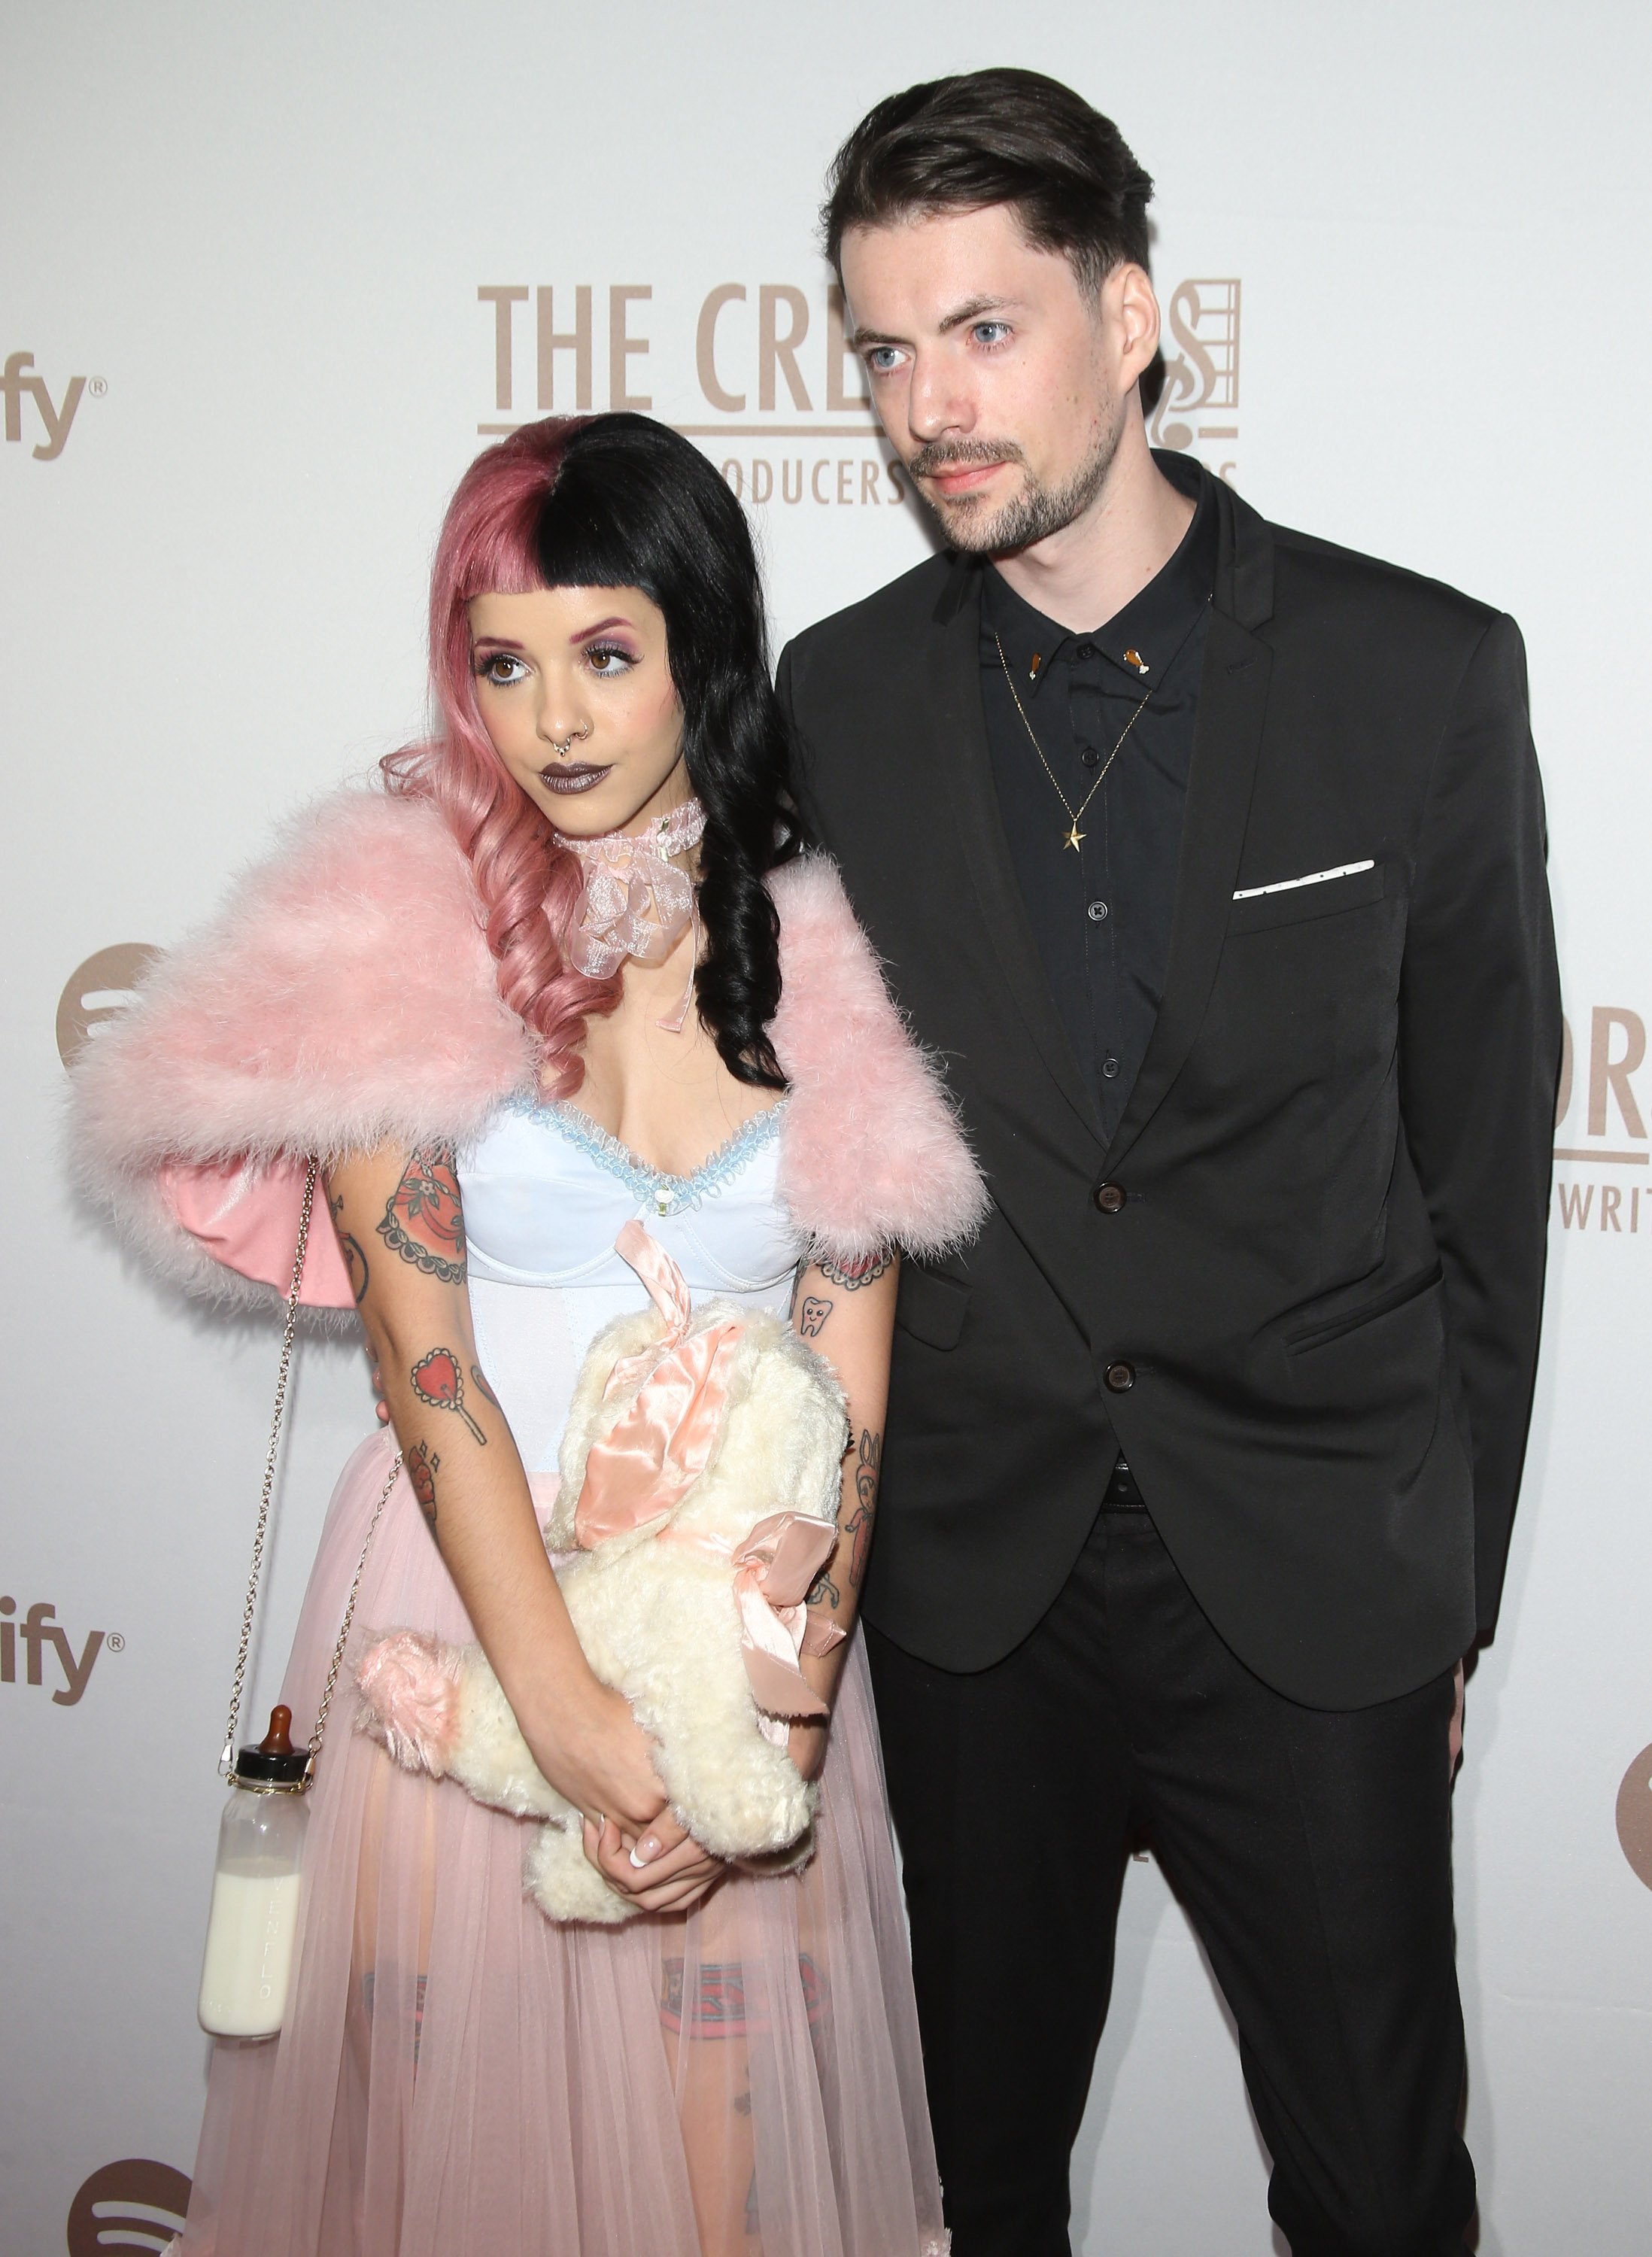 Melanie Martinez (L) and Michael Keenan at The Creators Party presented by Spotify, held at Cicada, on February 13, 2016, in Los Angeles, California. | Source: Getty Images